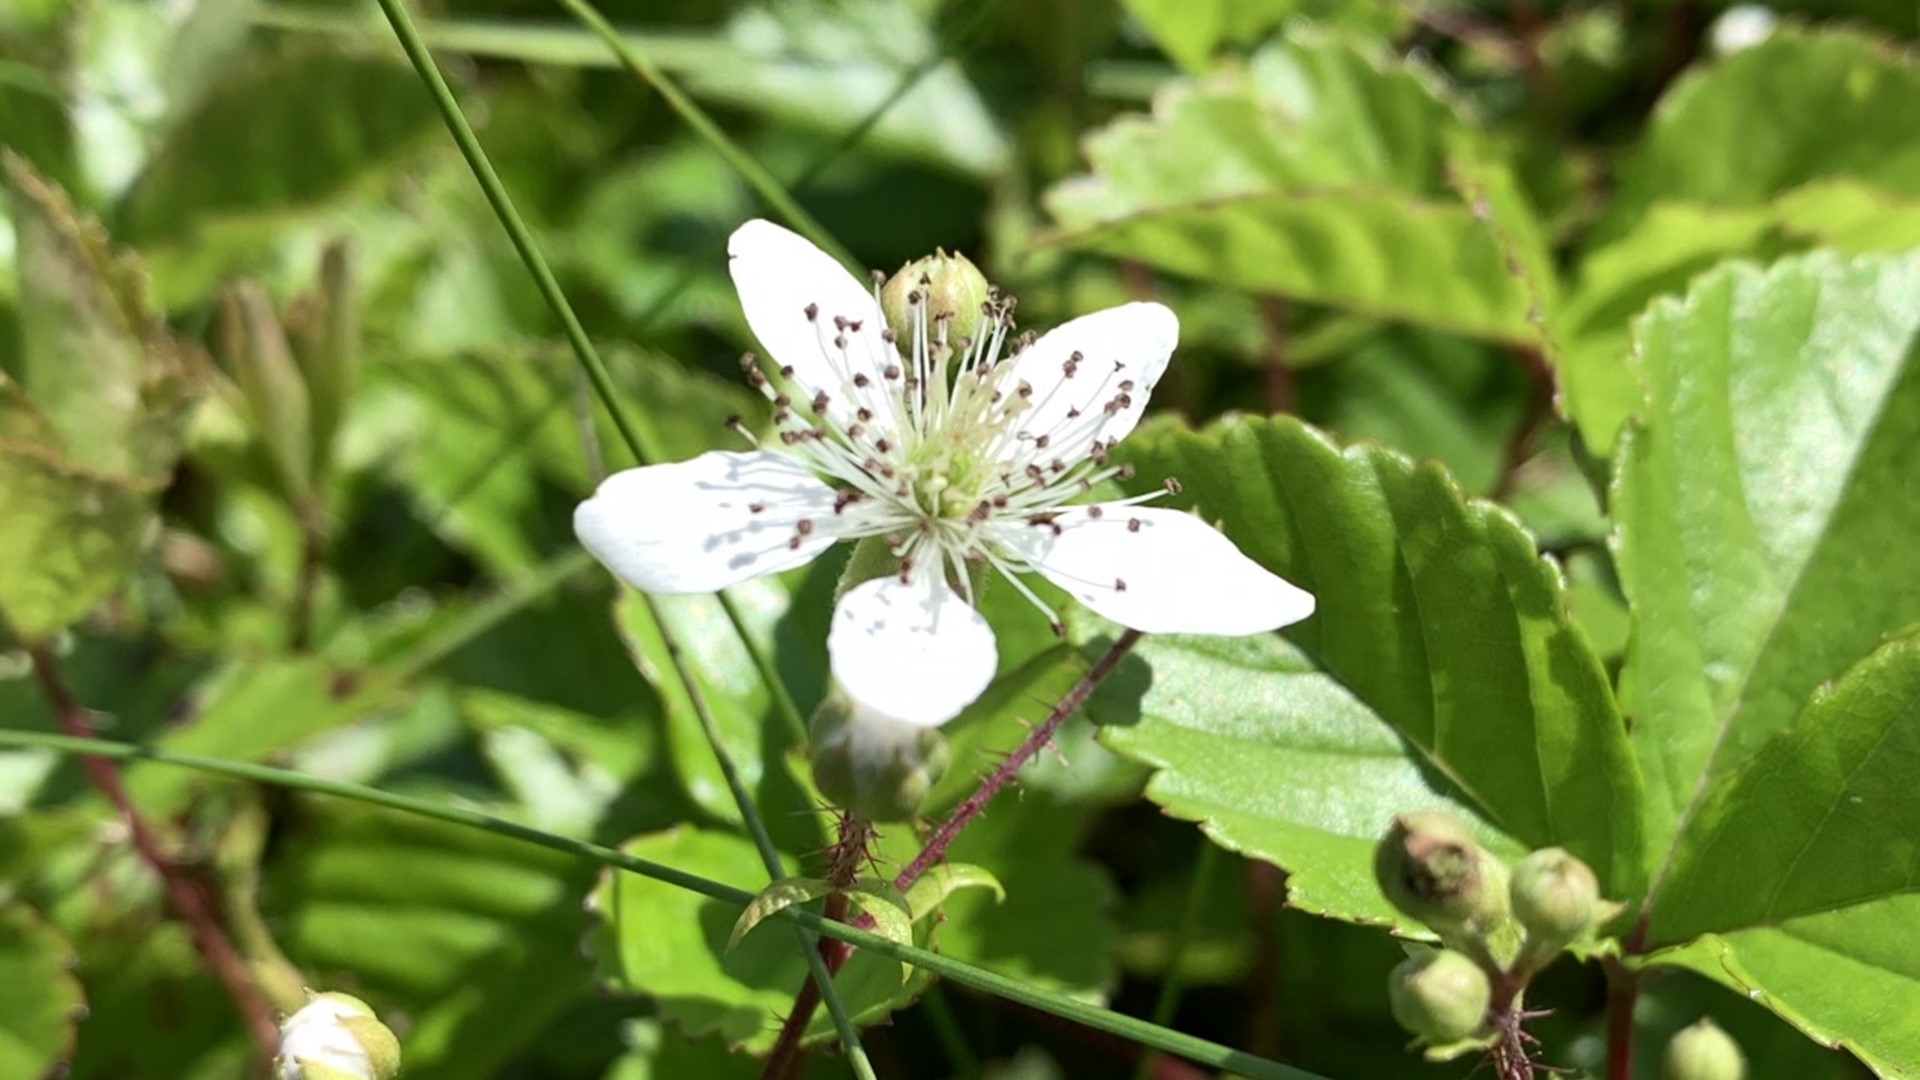 Jon Meyer headed to Moosic Mountain and spotted different kinds of blooms at this beautiful preserve.